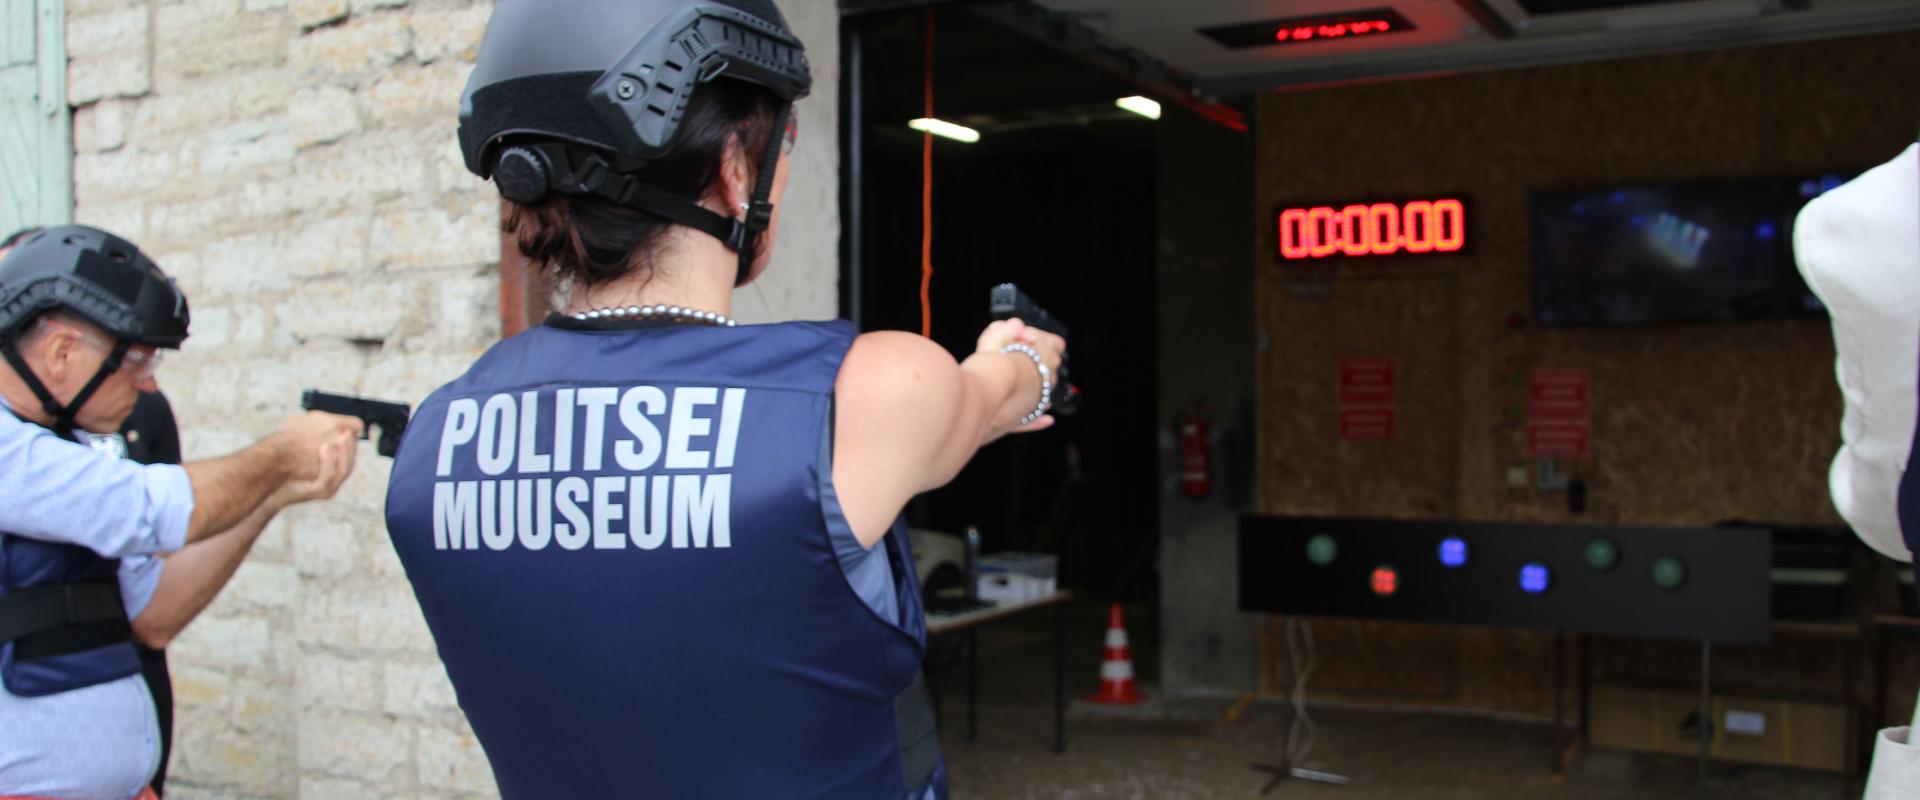 Team game "Become a member of special forces in the Estonian Police Museum" and an exciting museum visit